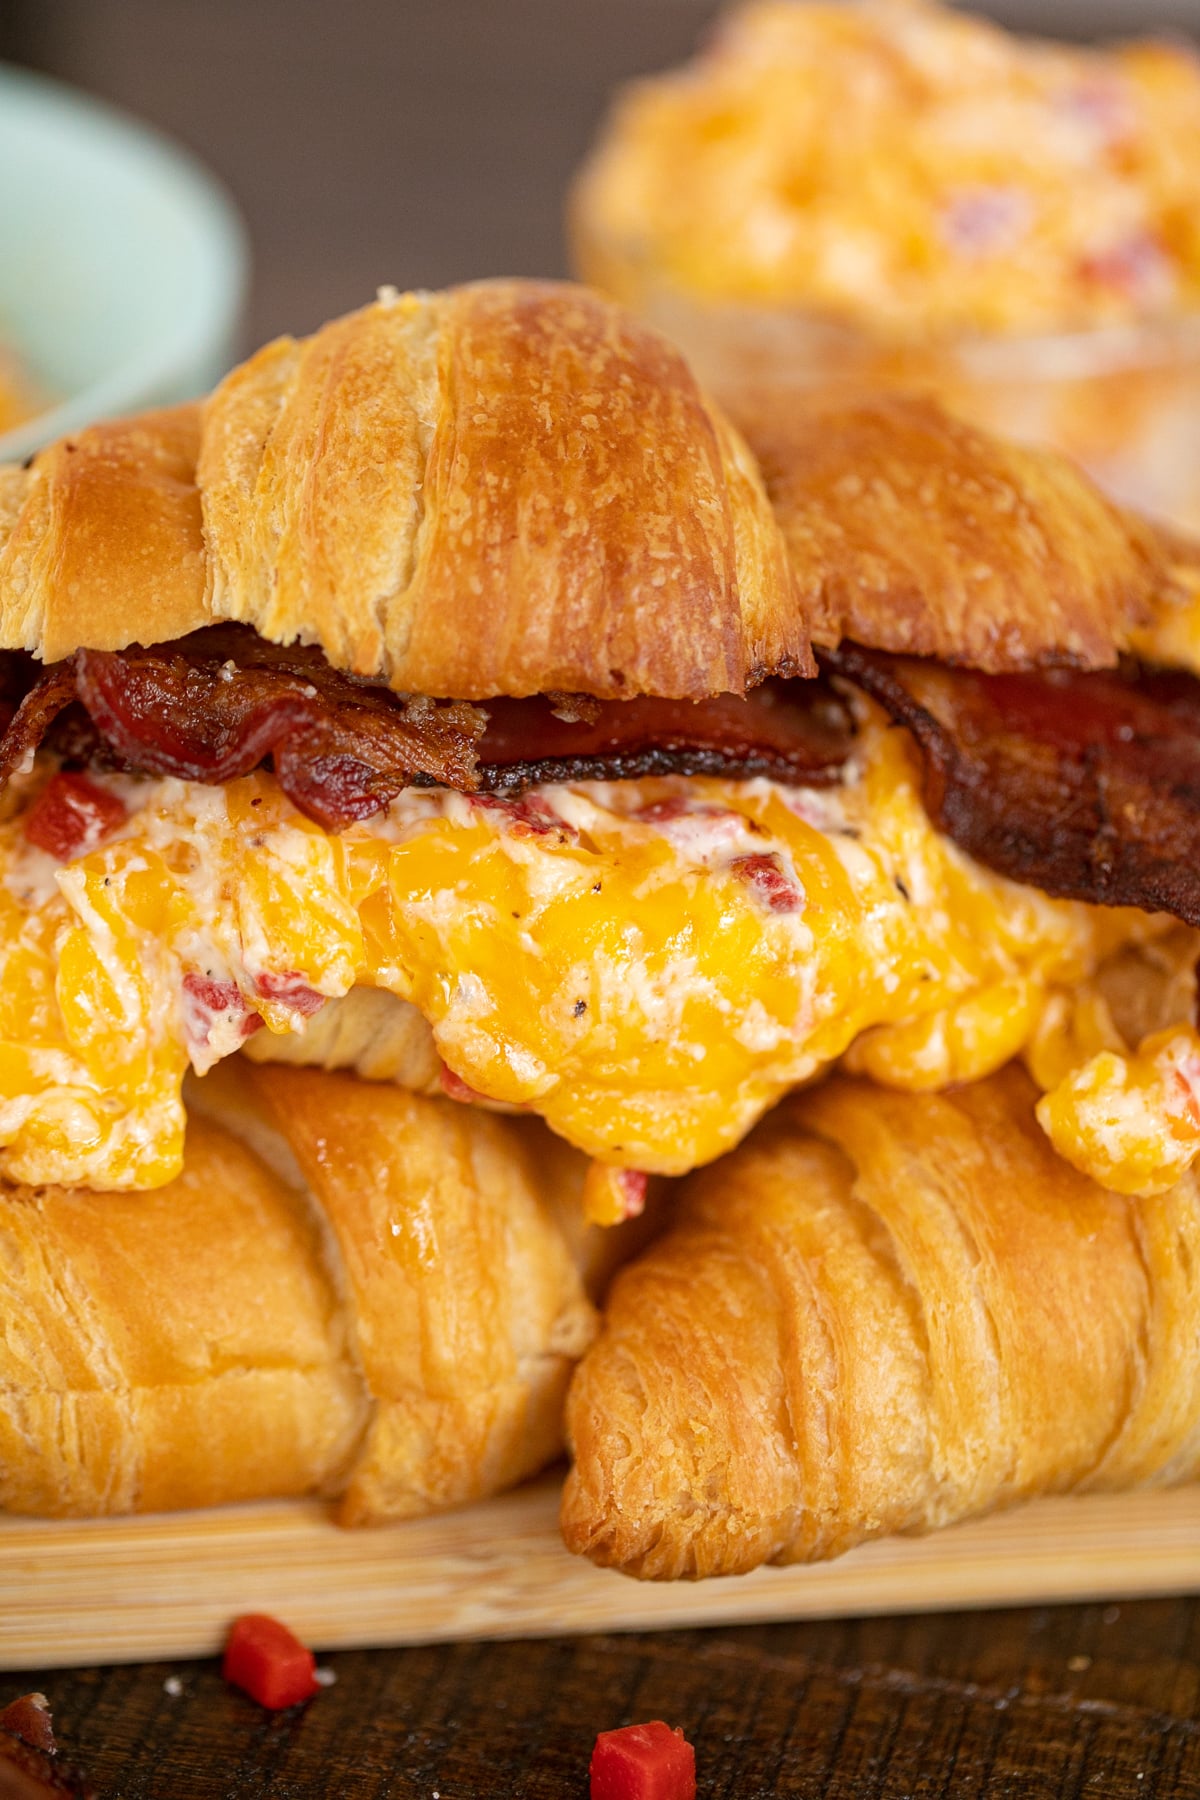 Ooey gooey pimento cheese that has been toasted on a sandwich.